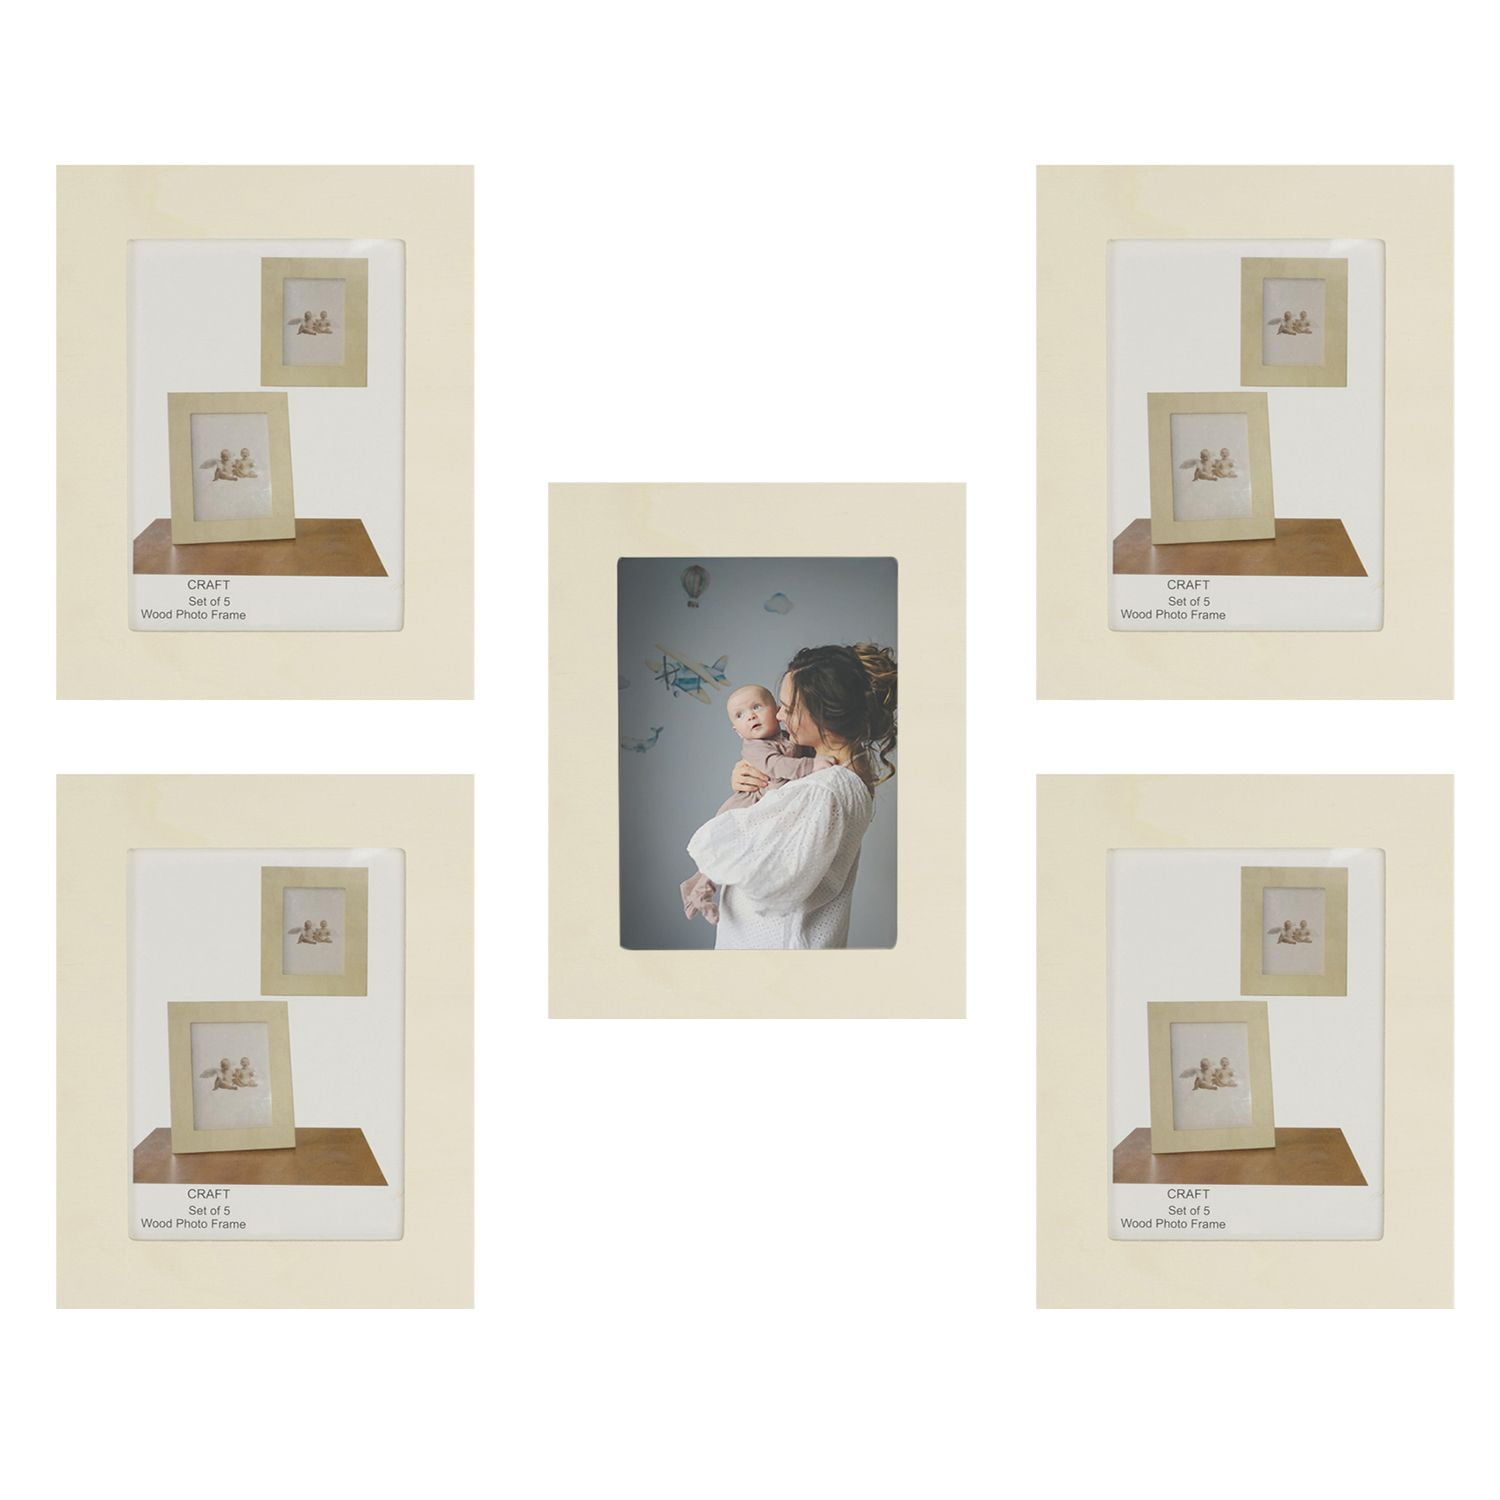 10Pcs/Set Photo Frame 6 Inch Cadre Photo Gift DIY Wall Hanging Paper Wall Frame 